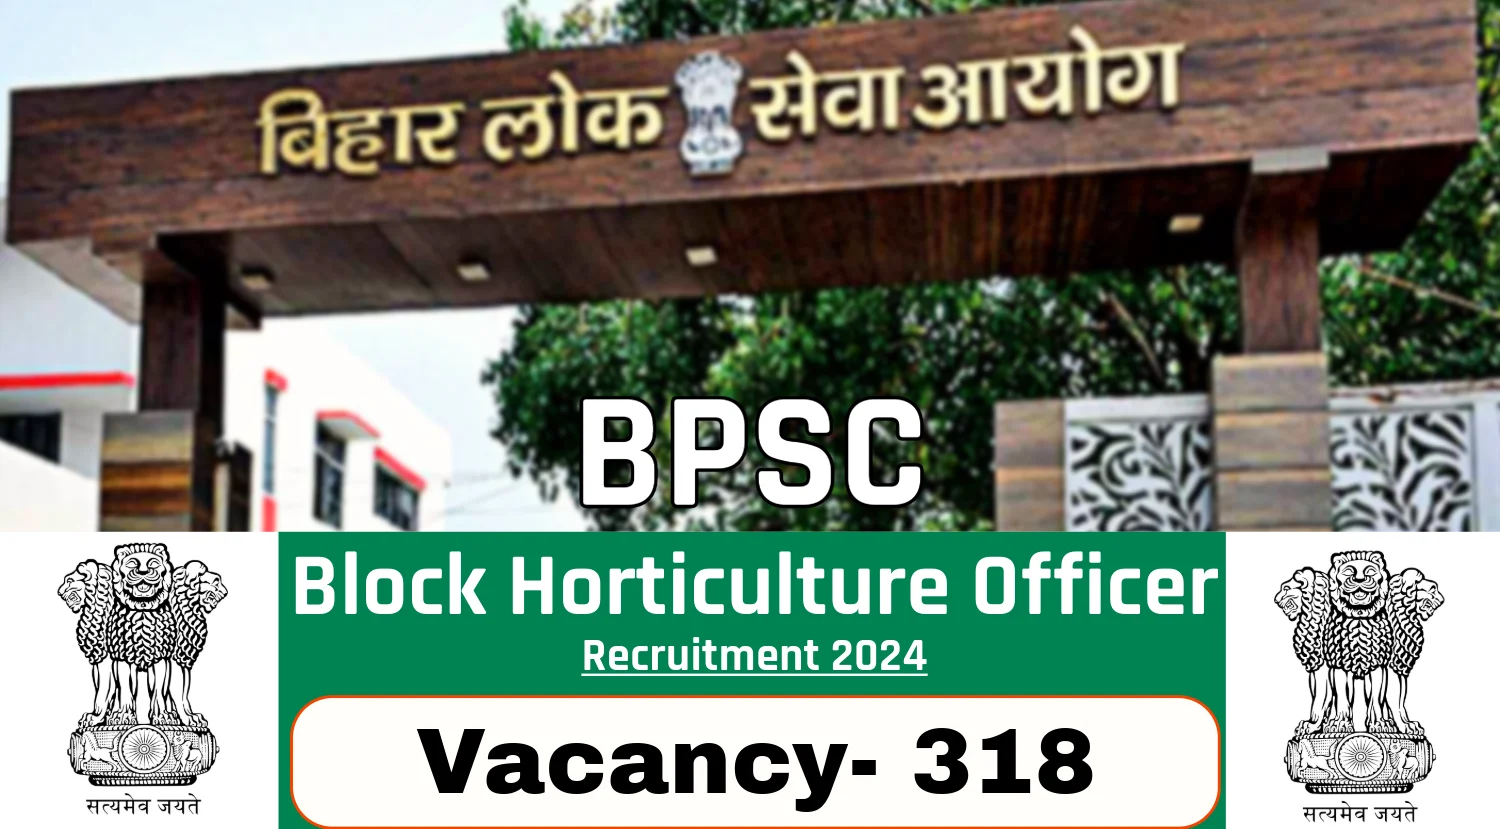 BPSC Block Horticulture Officer Recruitment 2024, Check Eligibility Details For Bihar BHO Vacancies